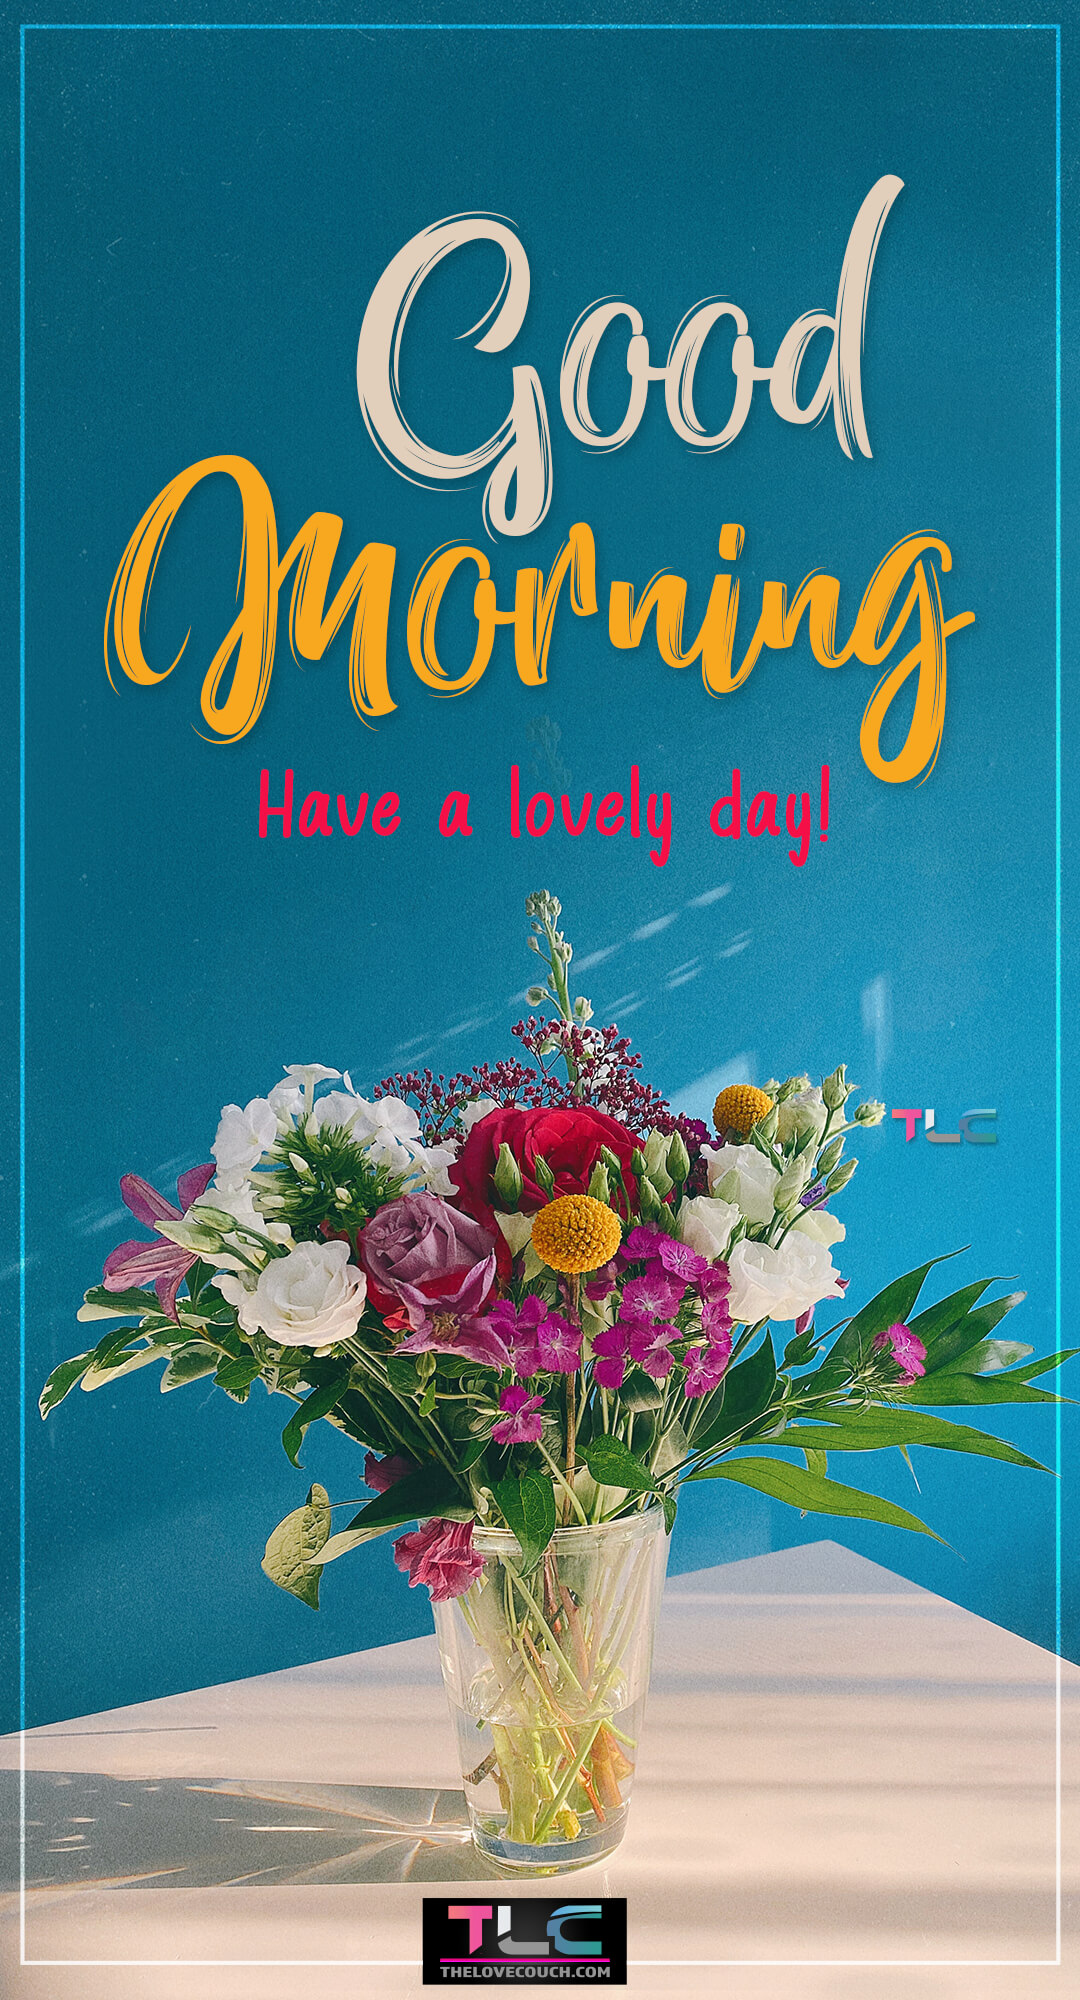 Good Morning Images - Bouquet of fresh multicolor flowers in vase - Have a lovely day